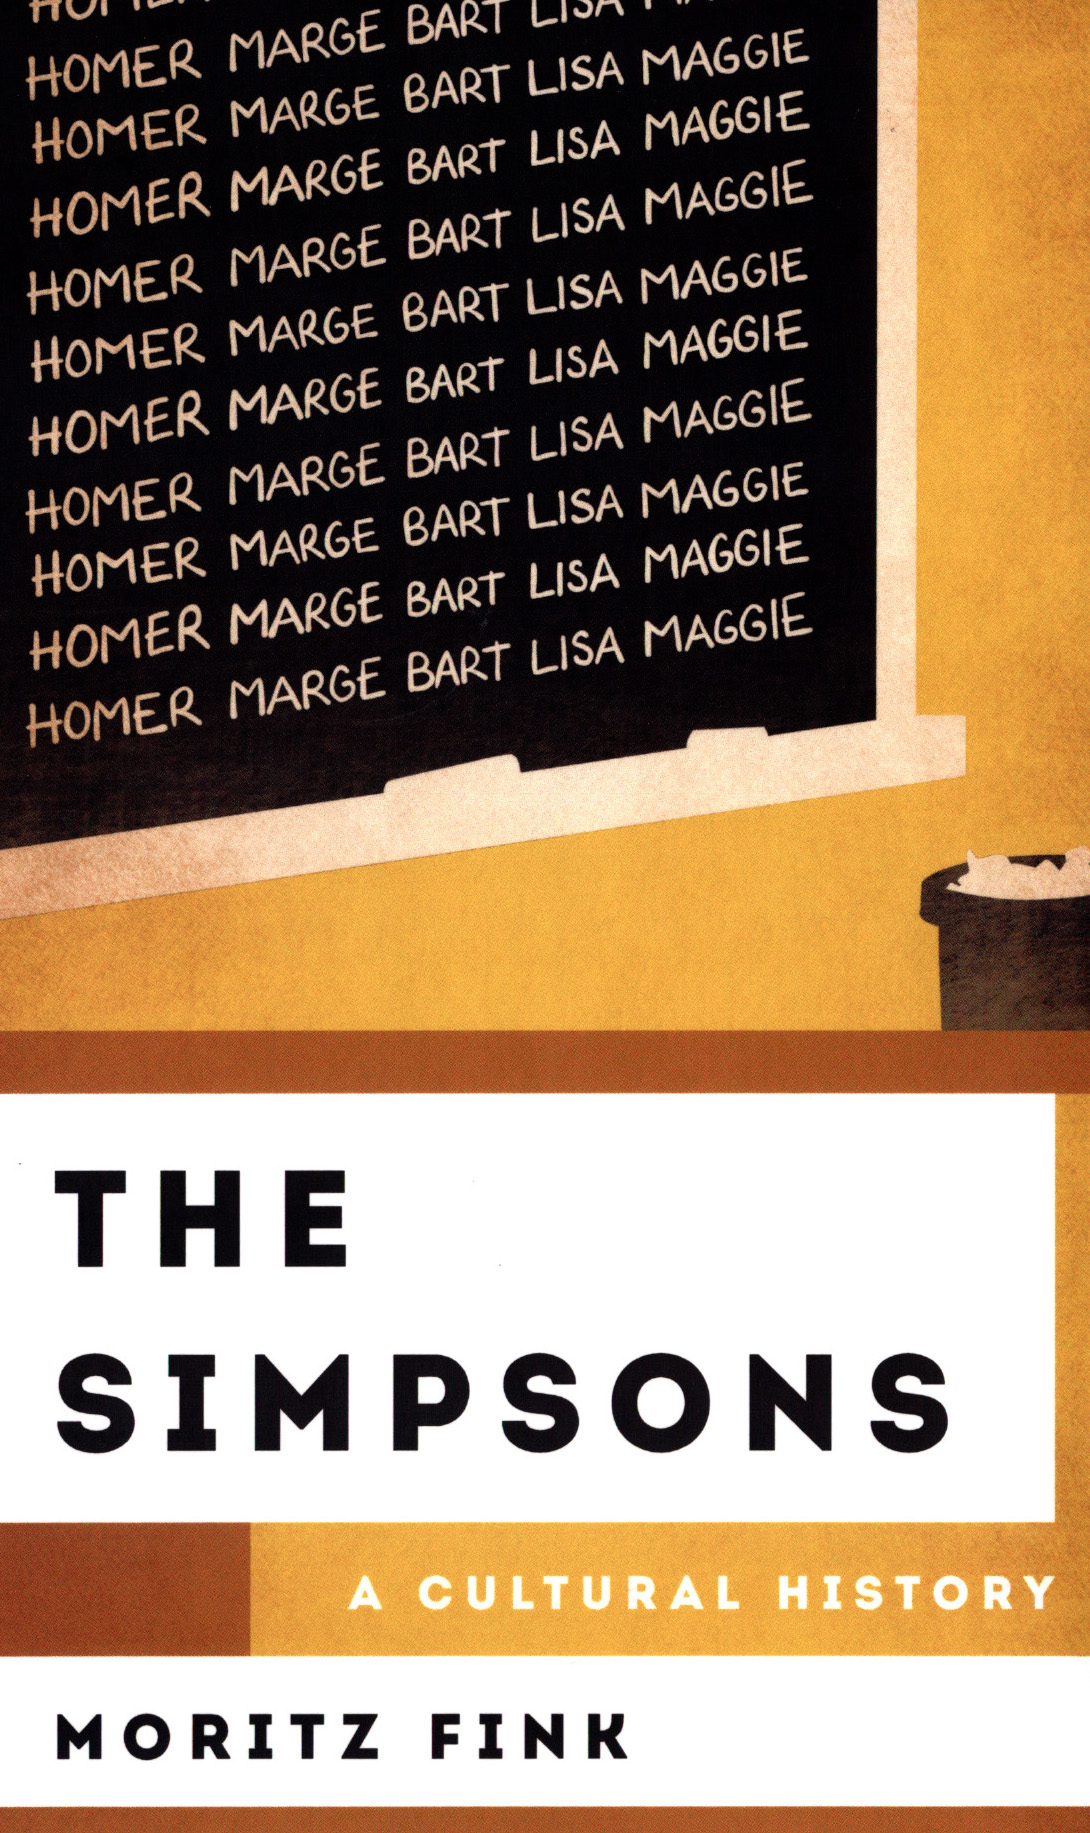 The Simpsons: A Cultural History book cover